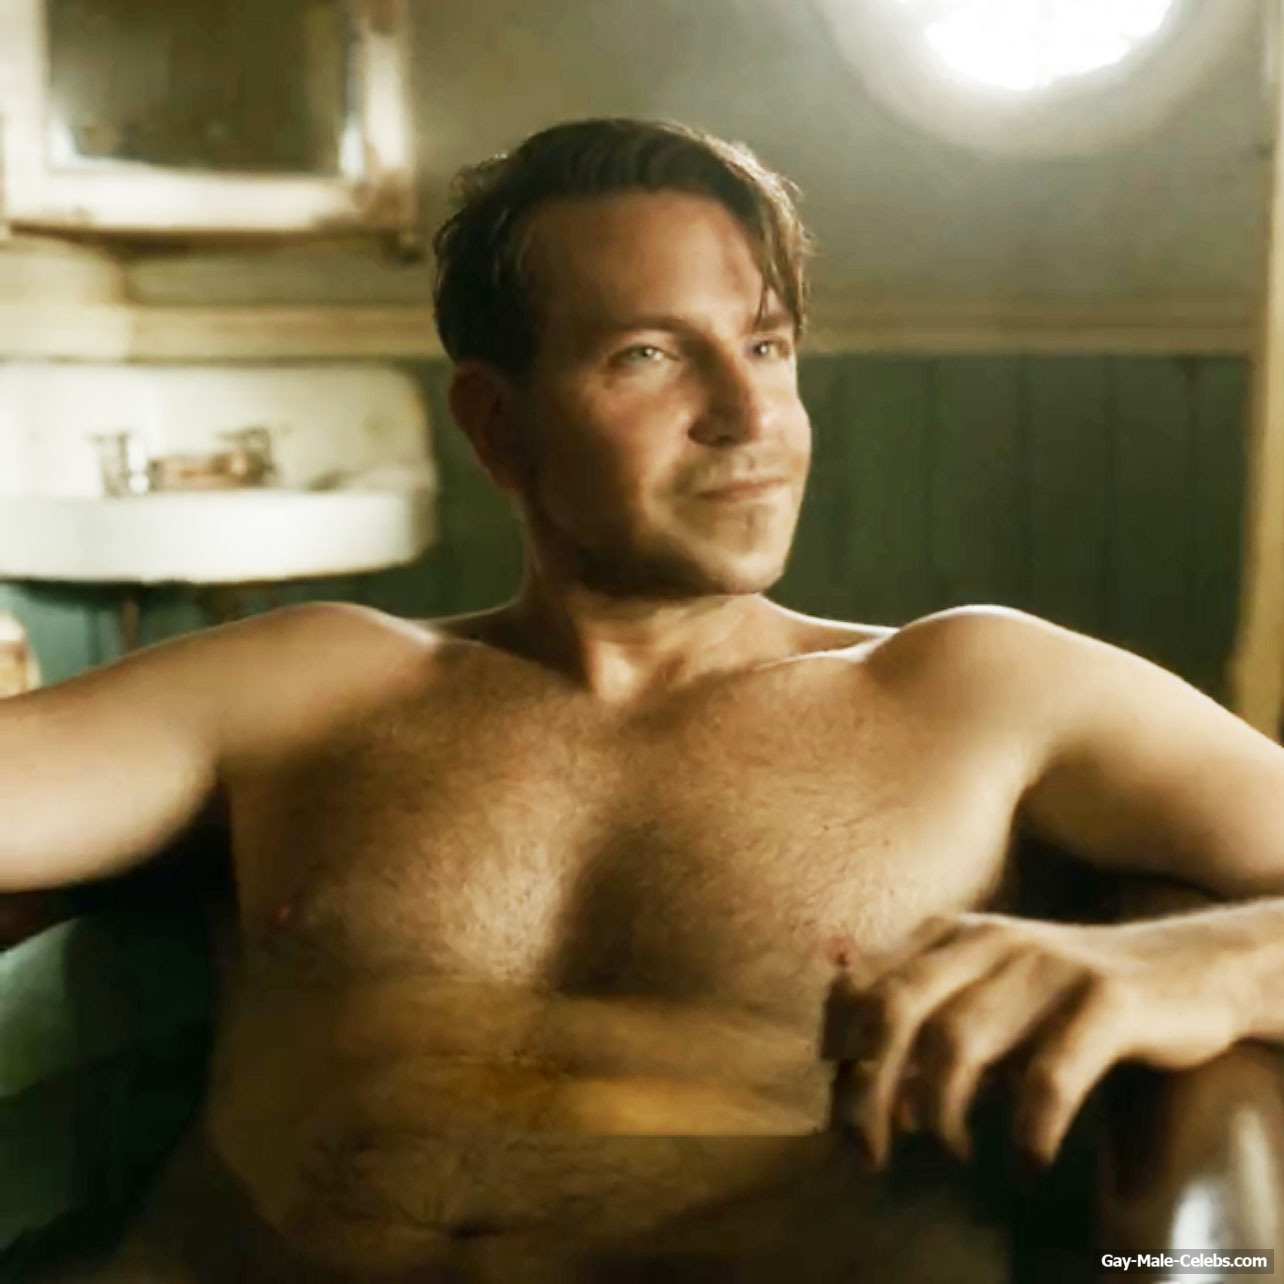 Not so long ago, Bradley Cooper starred frontally nude in Nightmare Alley. 